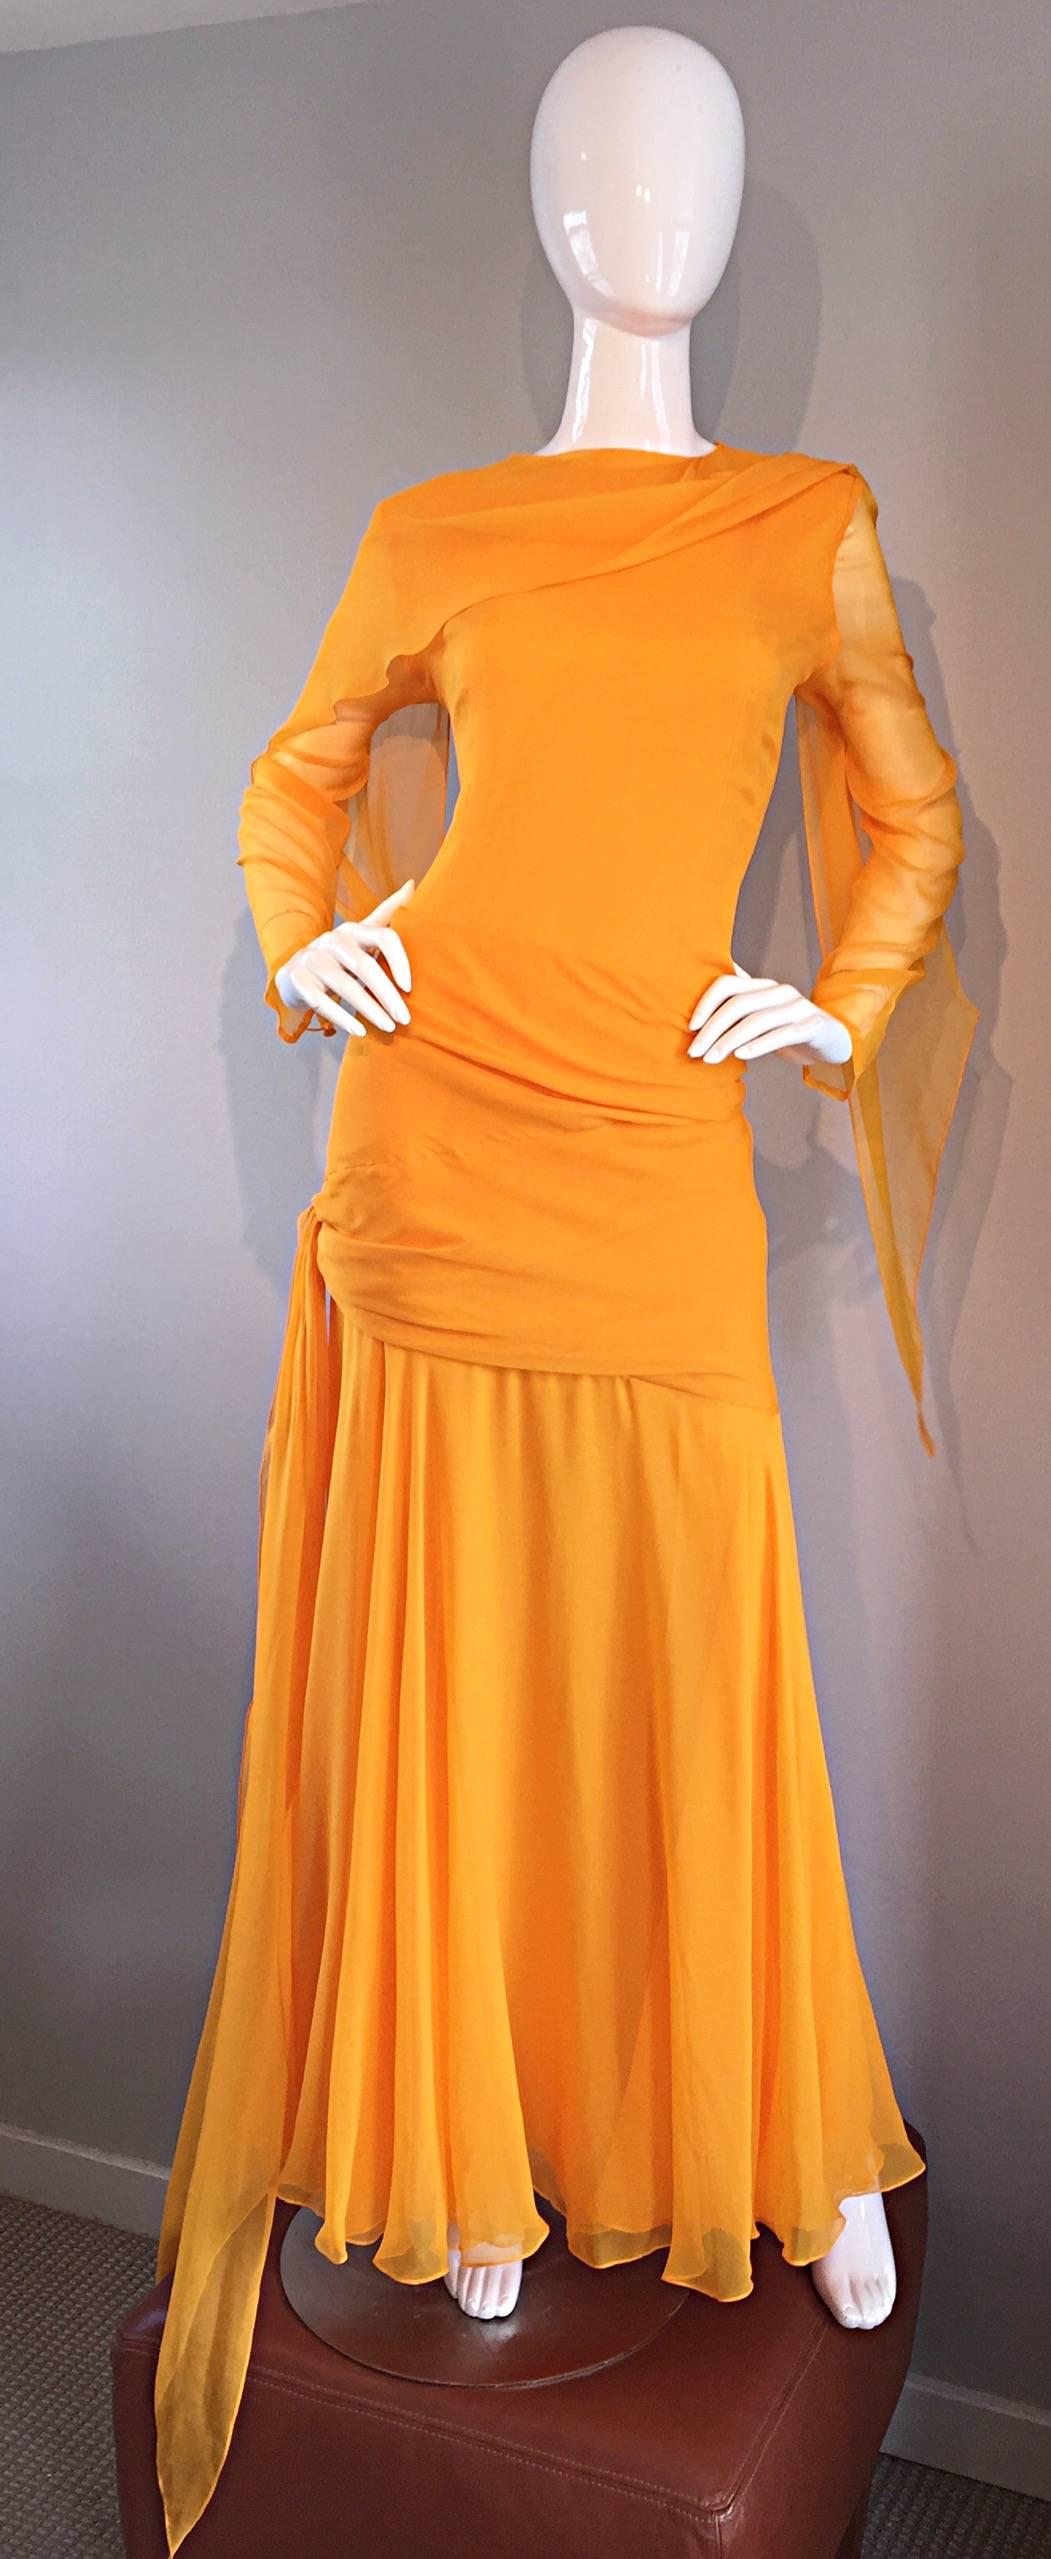 Sensational vintage BILL BLASS silk chiffon gown in the most beautiful marigold yellow color! Layers and layers of the finest chiffon that looks amazing with movement. Attached chiffon scarf, which can be left dangling in the front, or thrown over